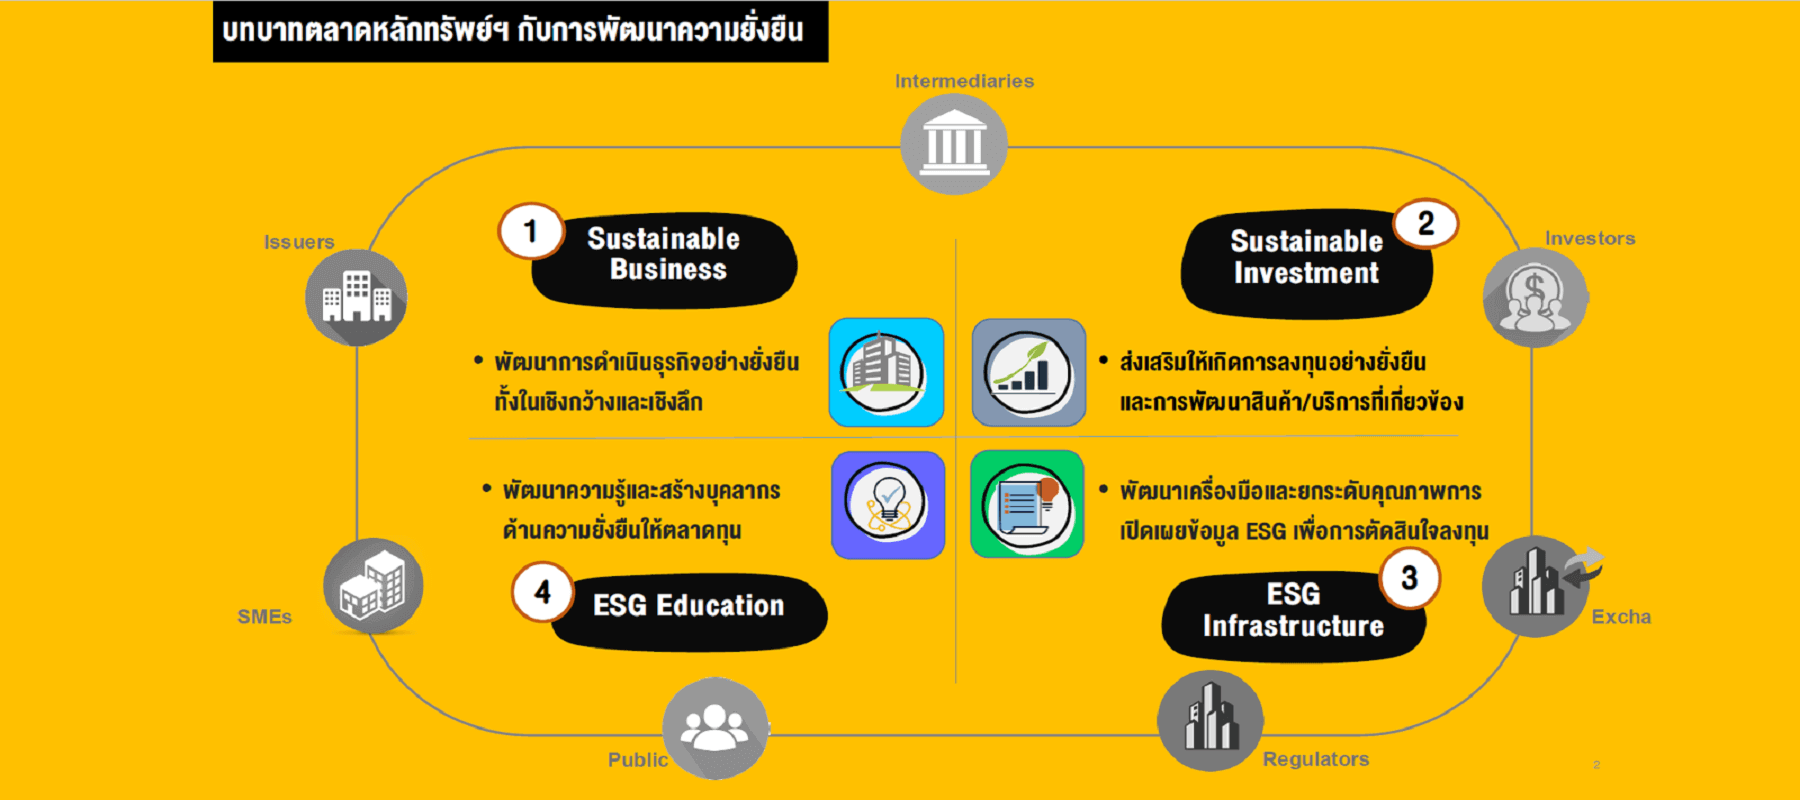 EARTH JUMP 2023, Sustainable Business, Sustainable Investment ,บริหารธุรกิจแบบยั่งยืน, ESG Infrastructure , ESG Education